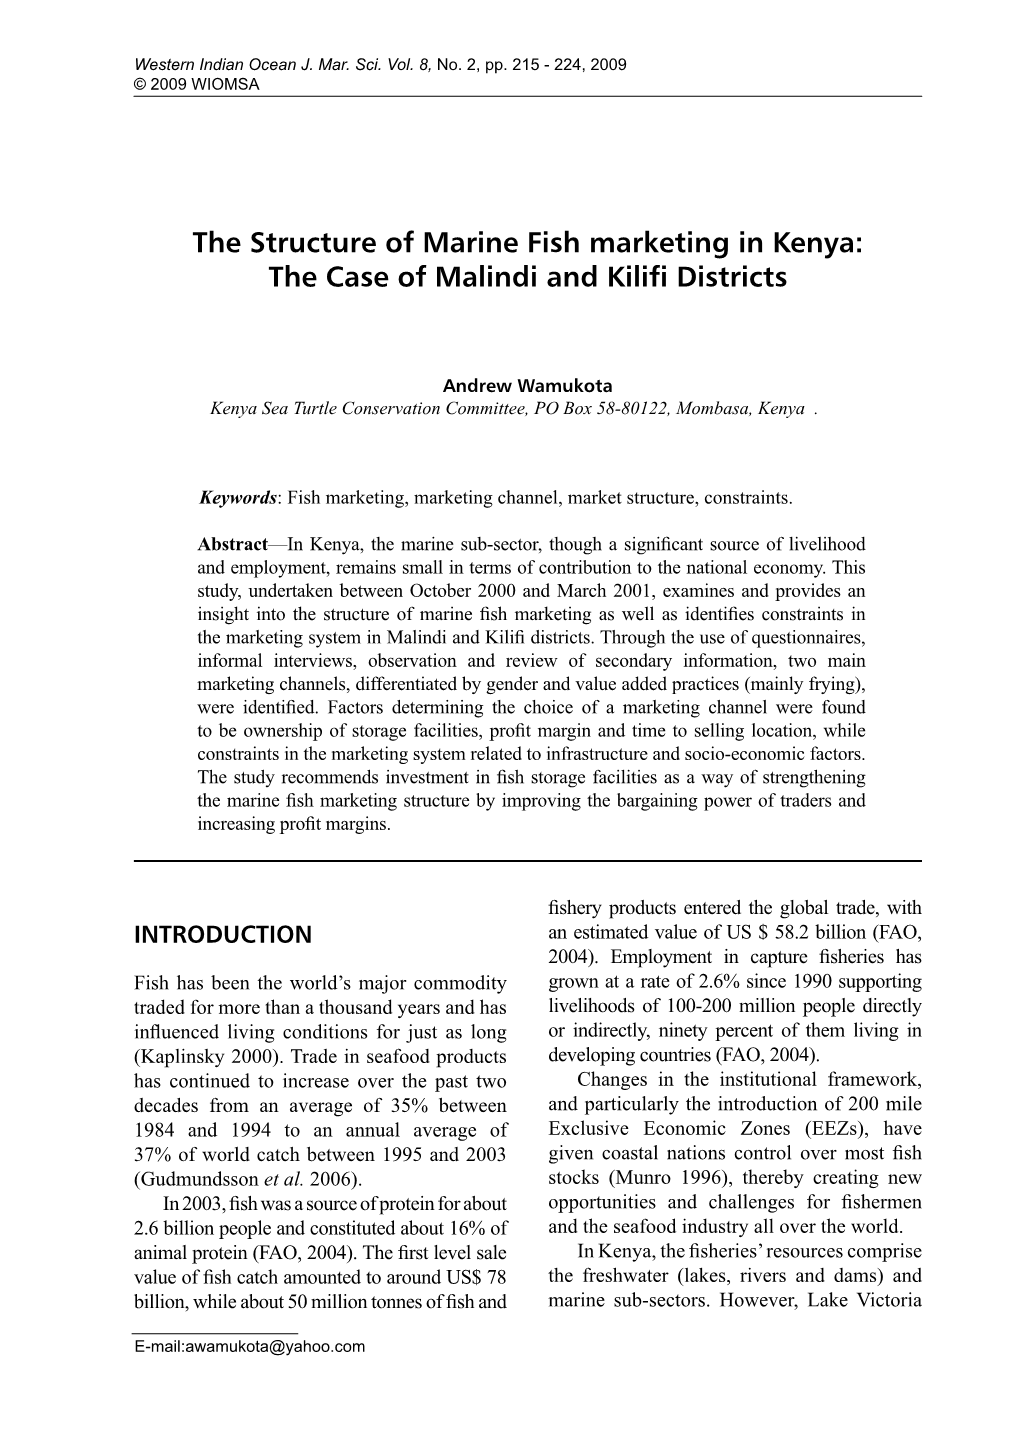 The Structure of Marine Fish Marketing in Kenya: the Case of Malindi and Kilifi Districts